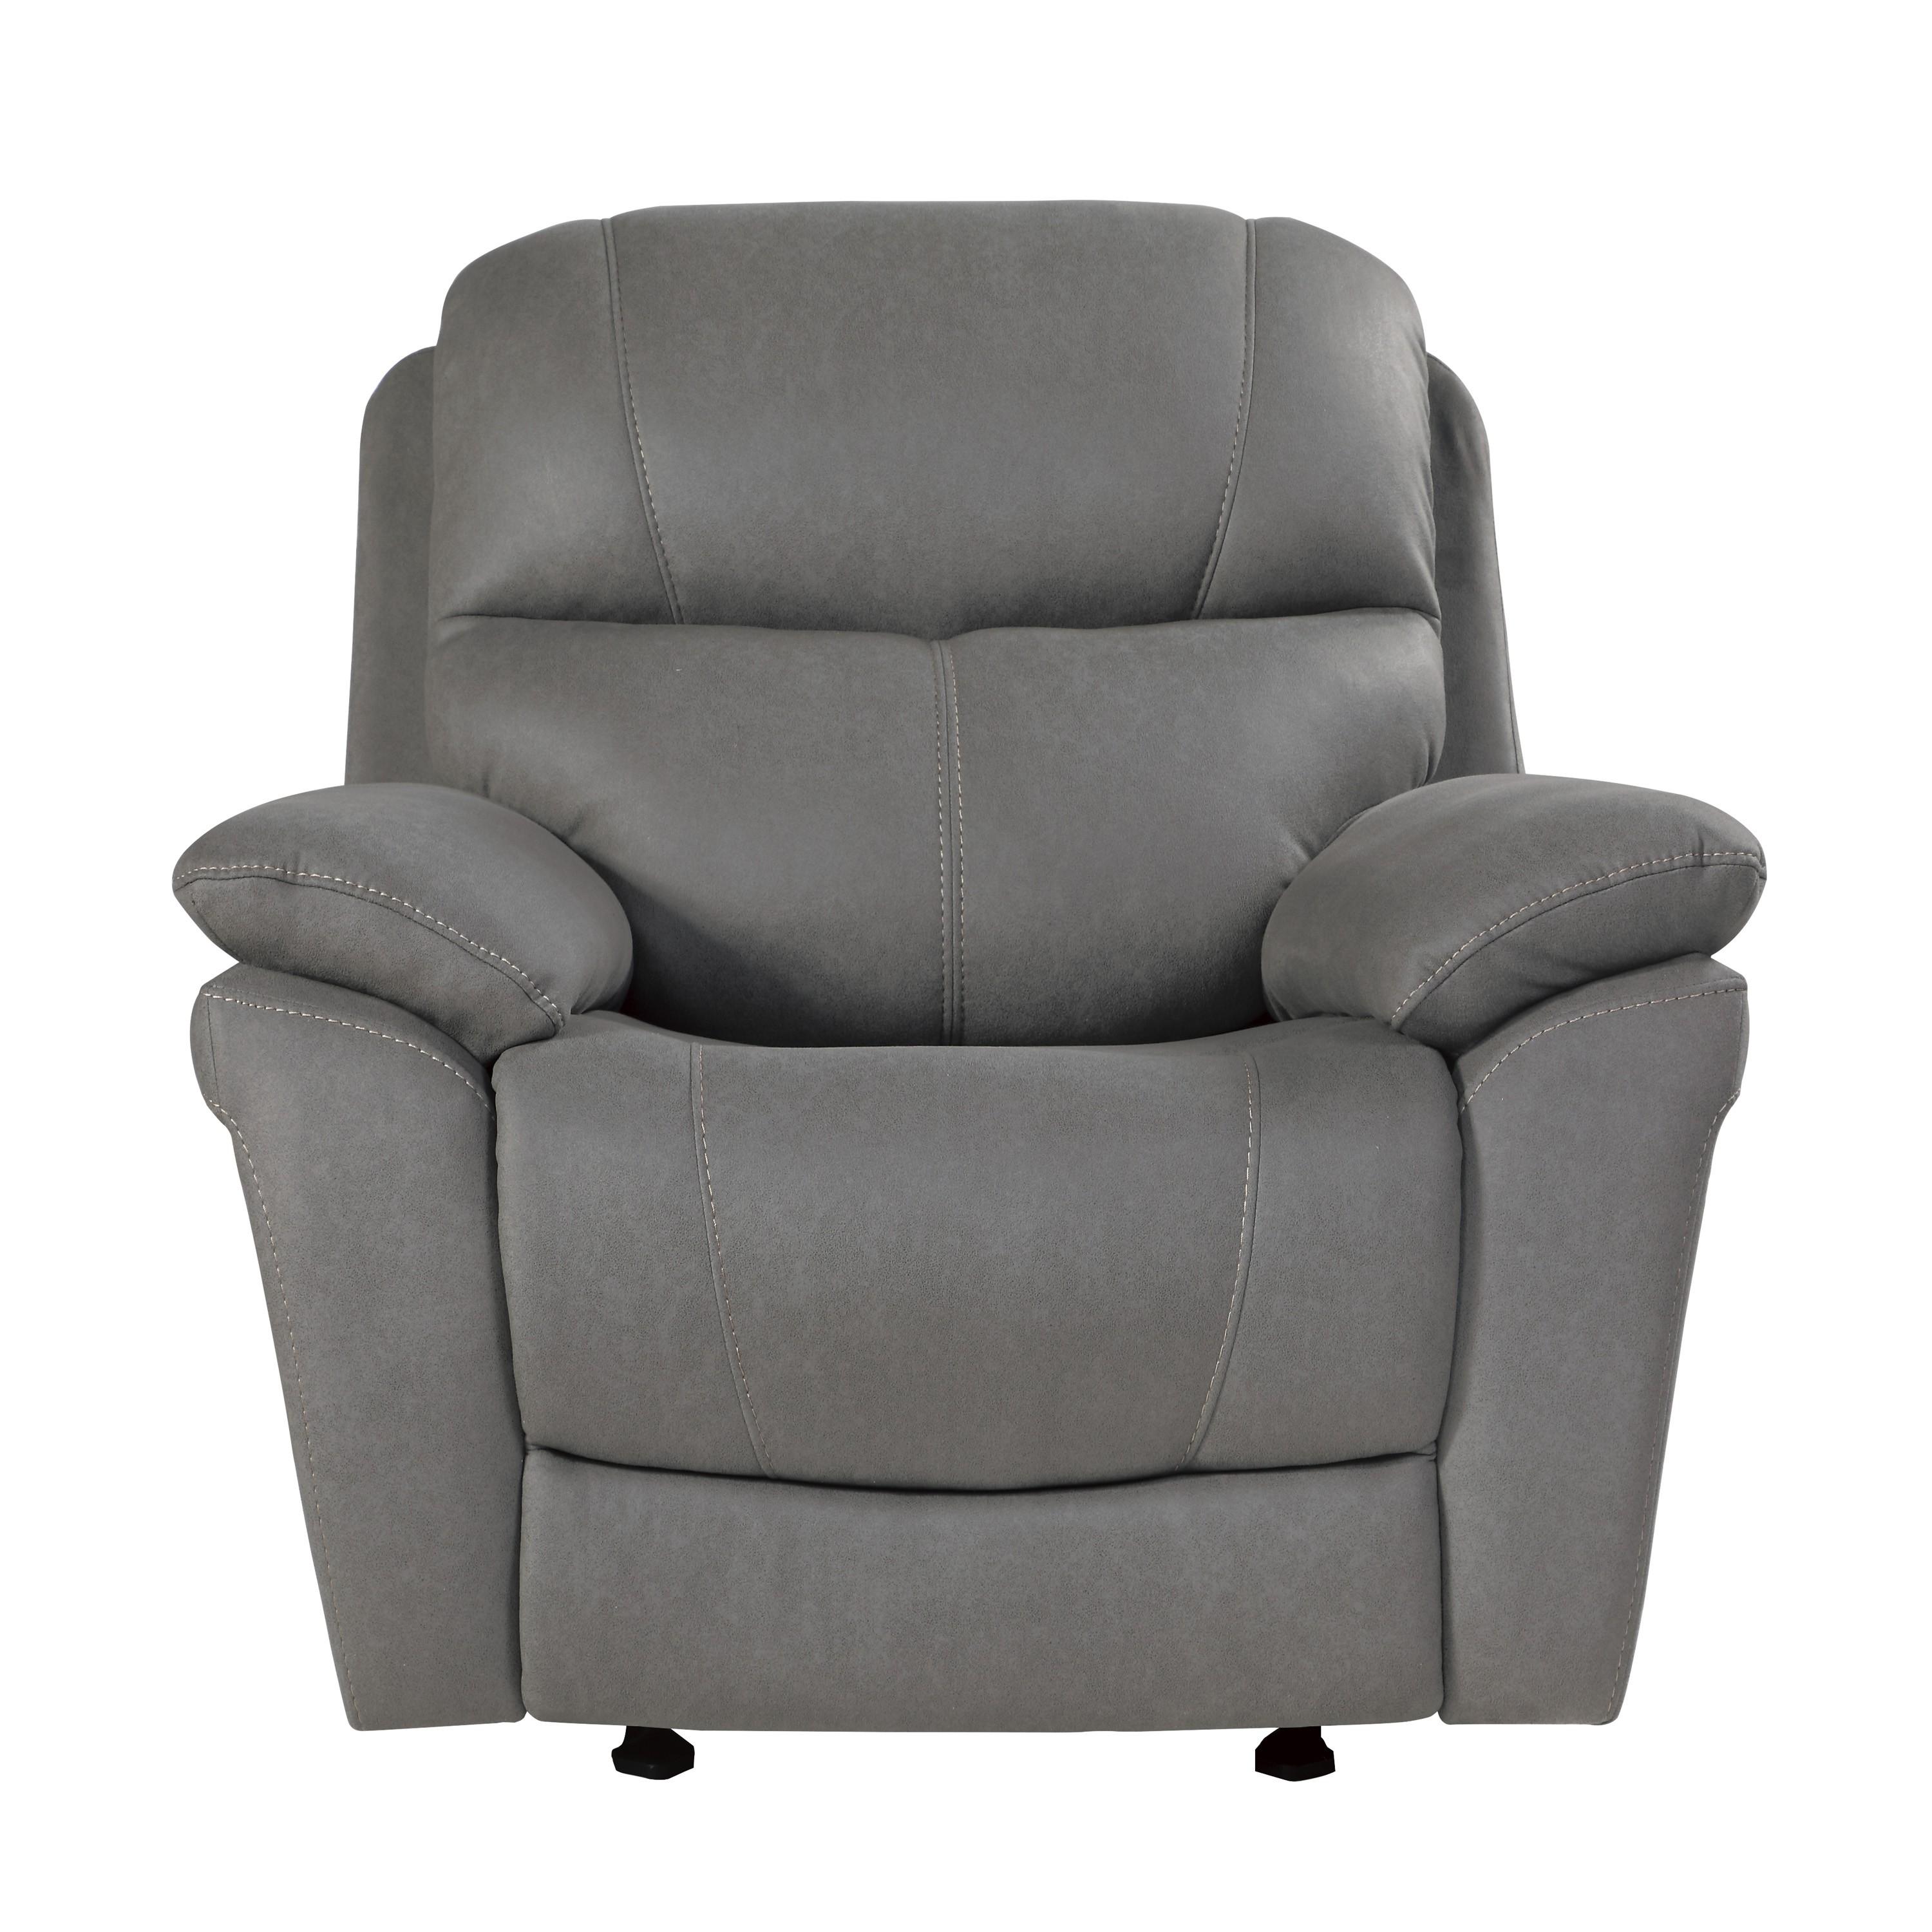 Transitional Reclining Chair 9580GY-1 Longvale 9580GY-1 in Gray Microfiber